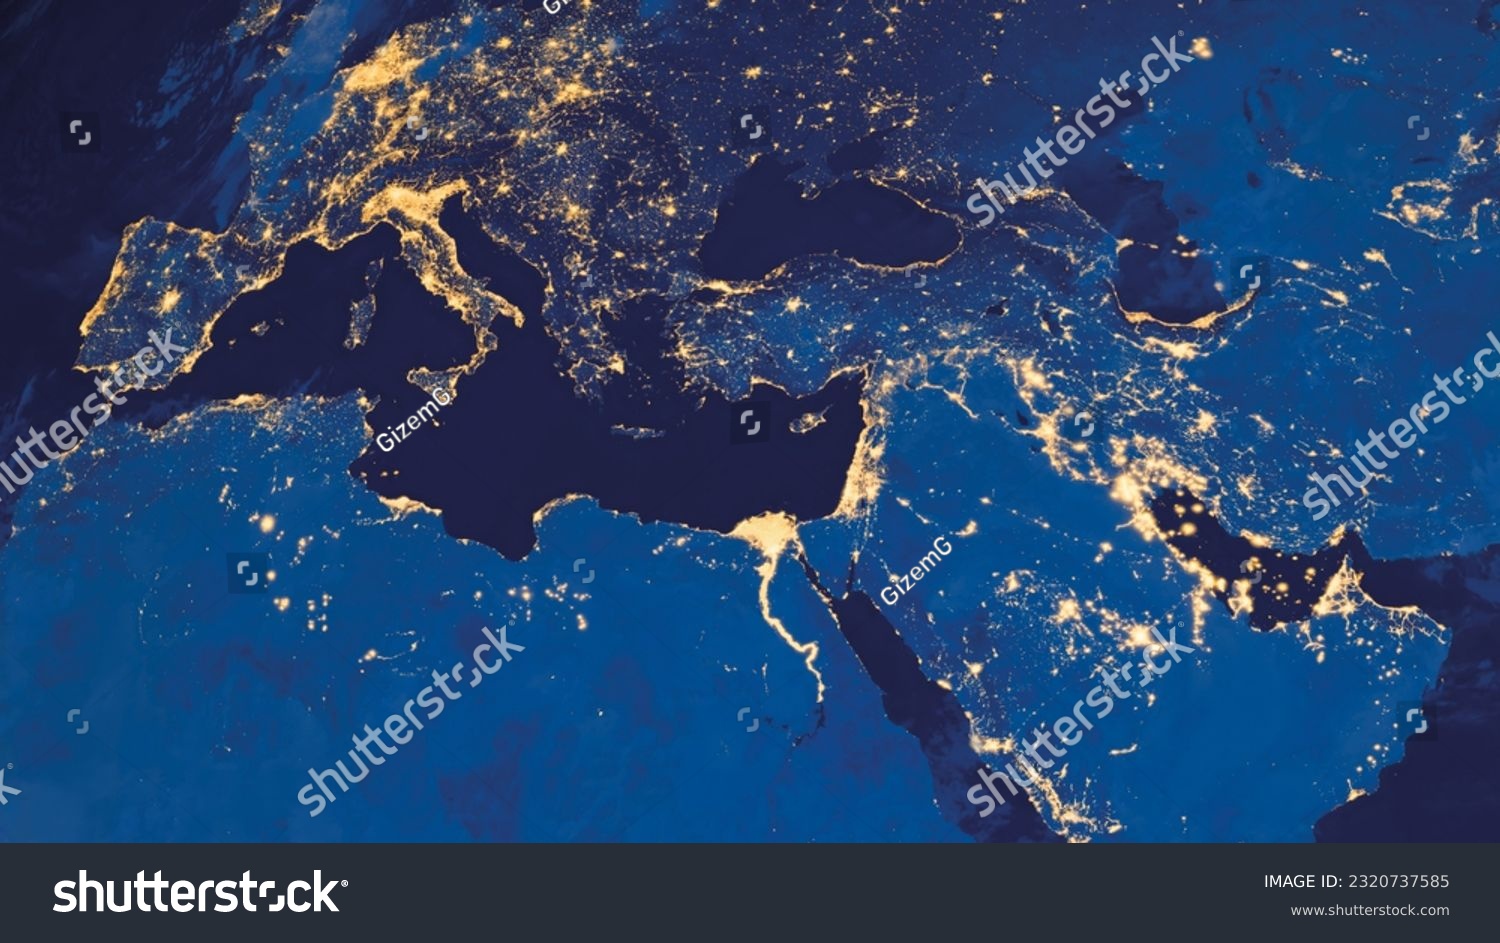 Earth photo at night background, World map. Satellite photo. City Lights of Europe, Middle East, Turkey, Italy, Black Sea, Mediterrenian Sea from space. Elements of this image furnished by NASA. #2320737585